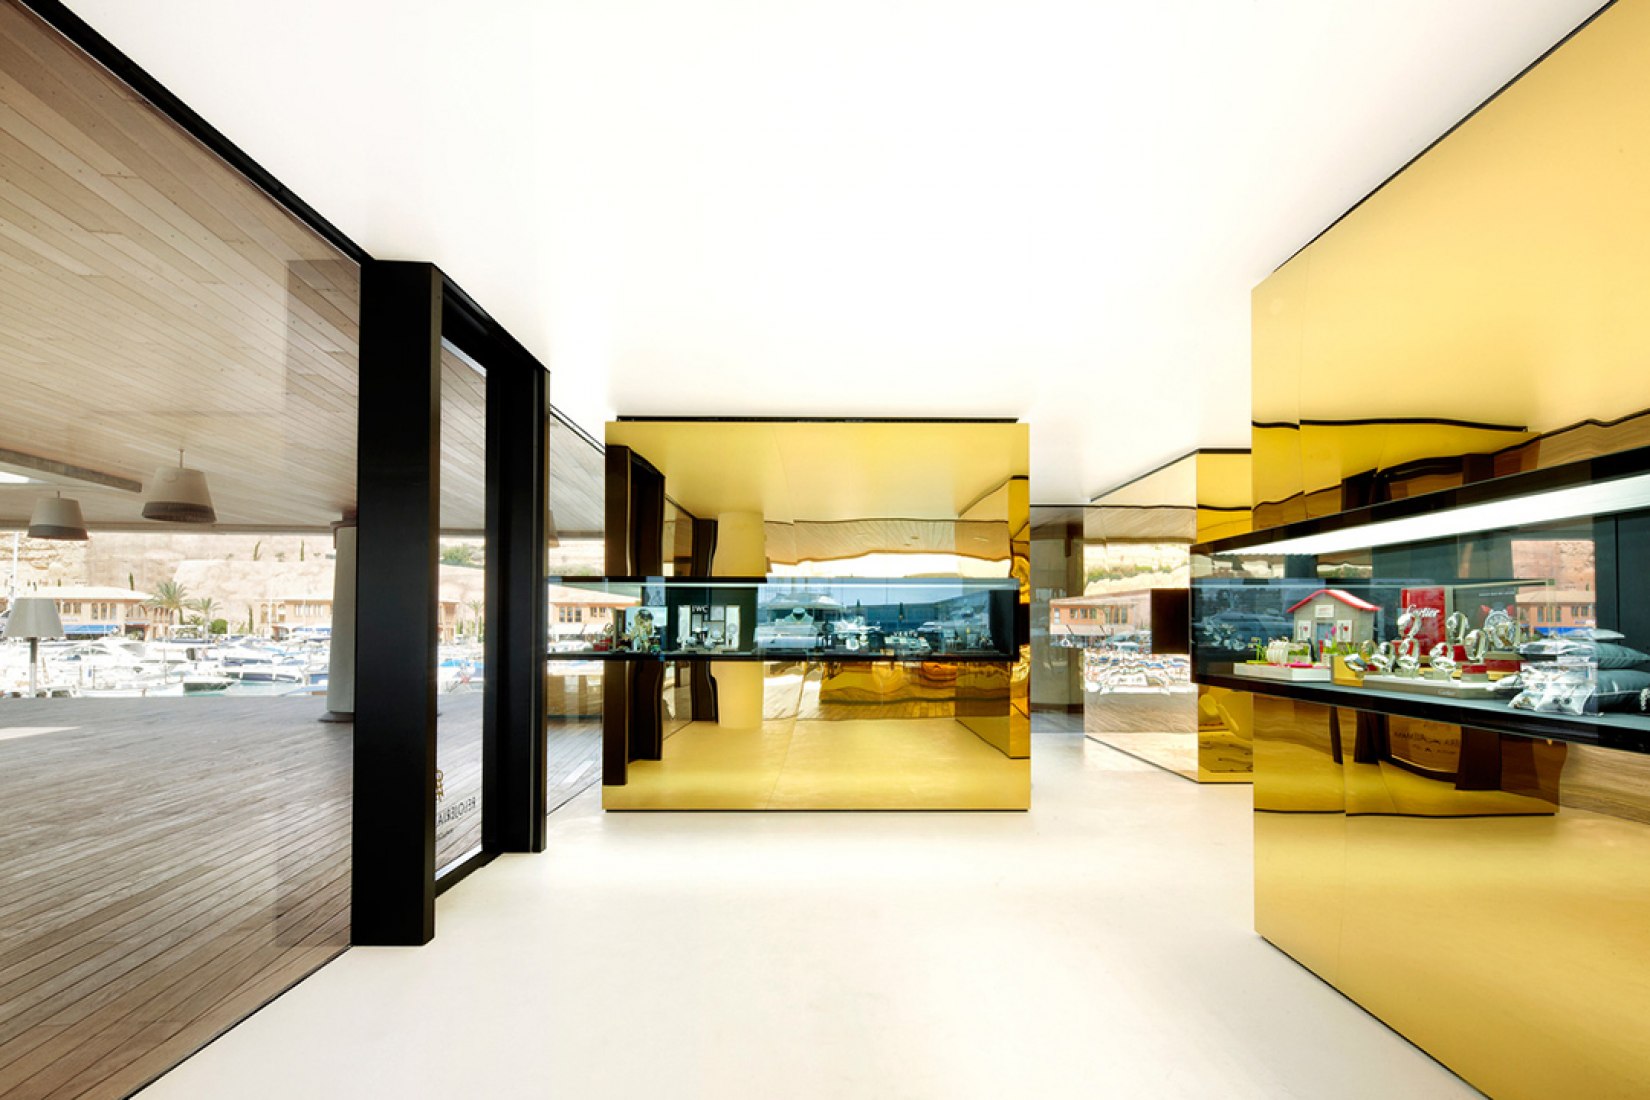 Read what the jury said.-  Five ‘precious boxes’, housing various functions, are the real gems in OHLab’s Mallorcan jewellery store. These stainless steel-clad volumes with golden mirror finishes add a sense of tangible luxury to the space, which the jury cites as a ‘very daring and well-proportioned project’ while complimenting the designers for ‘convincing the client that the architecture of a shop is at least as important as the merchandise’. 